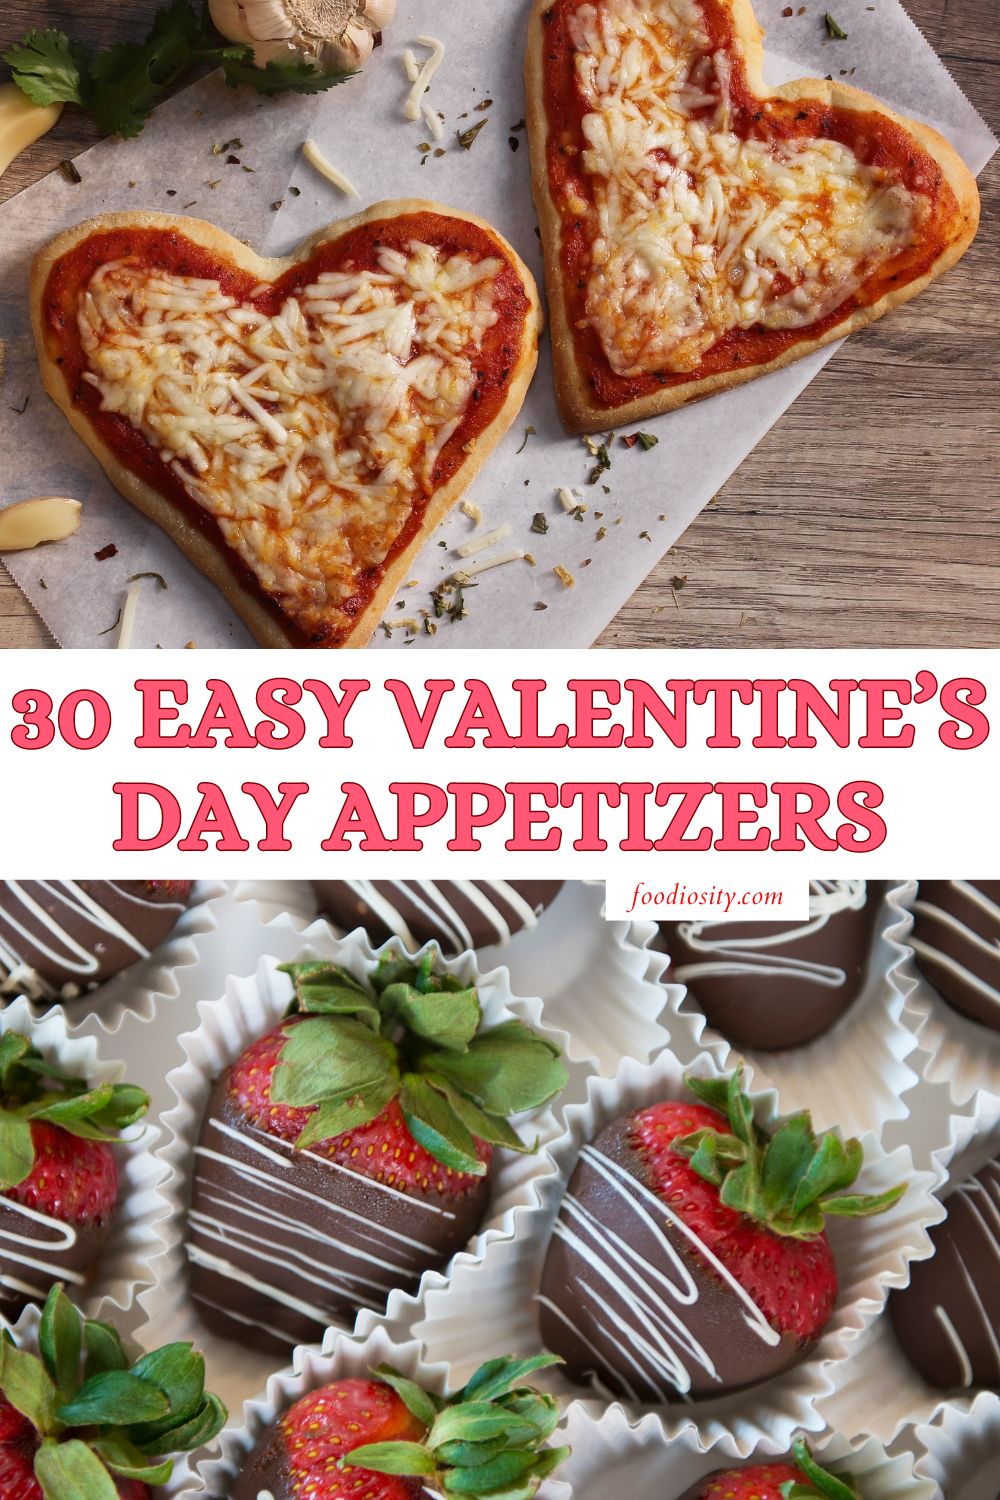 30 valentines day appetizers 1 (1)